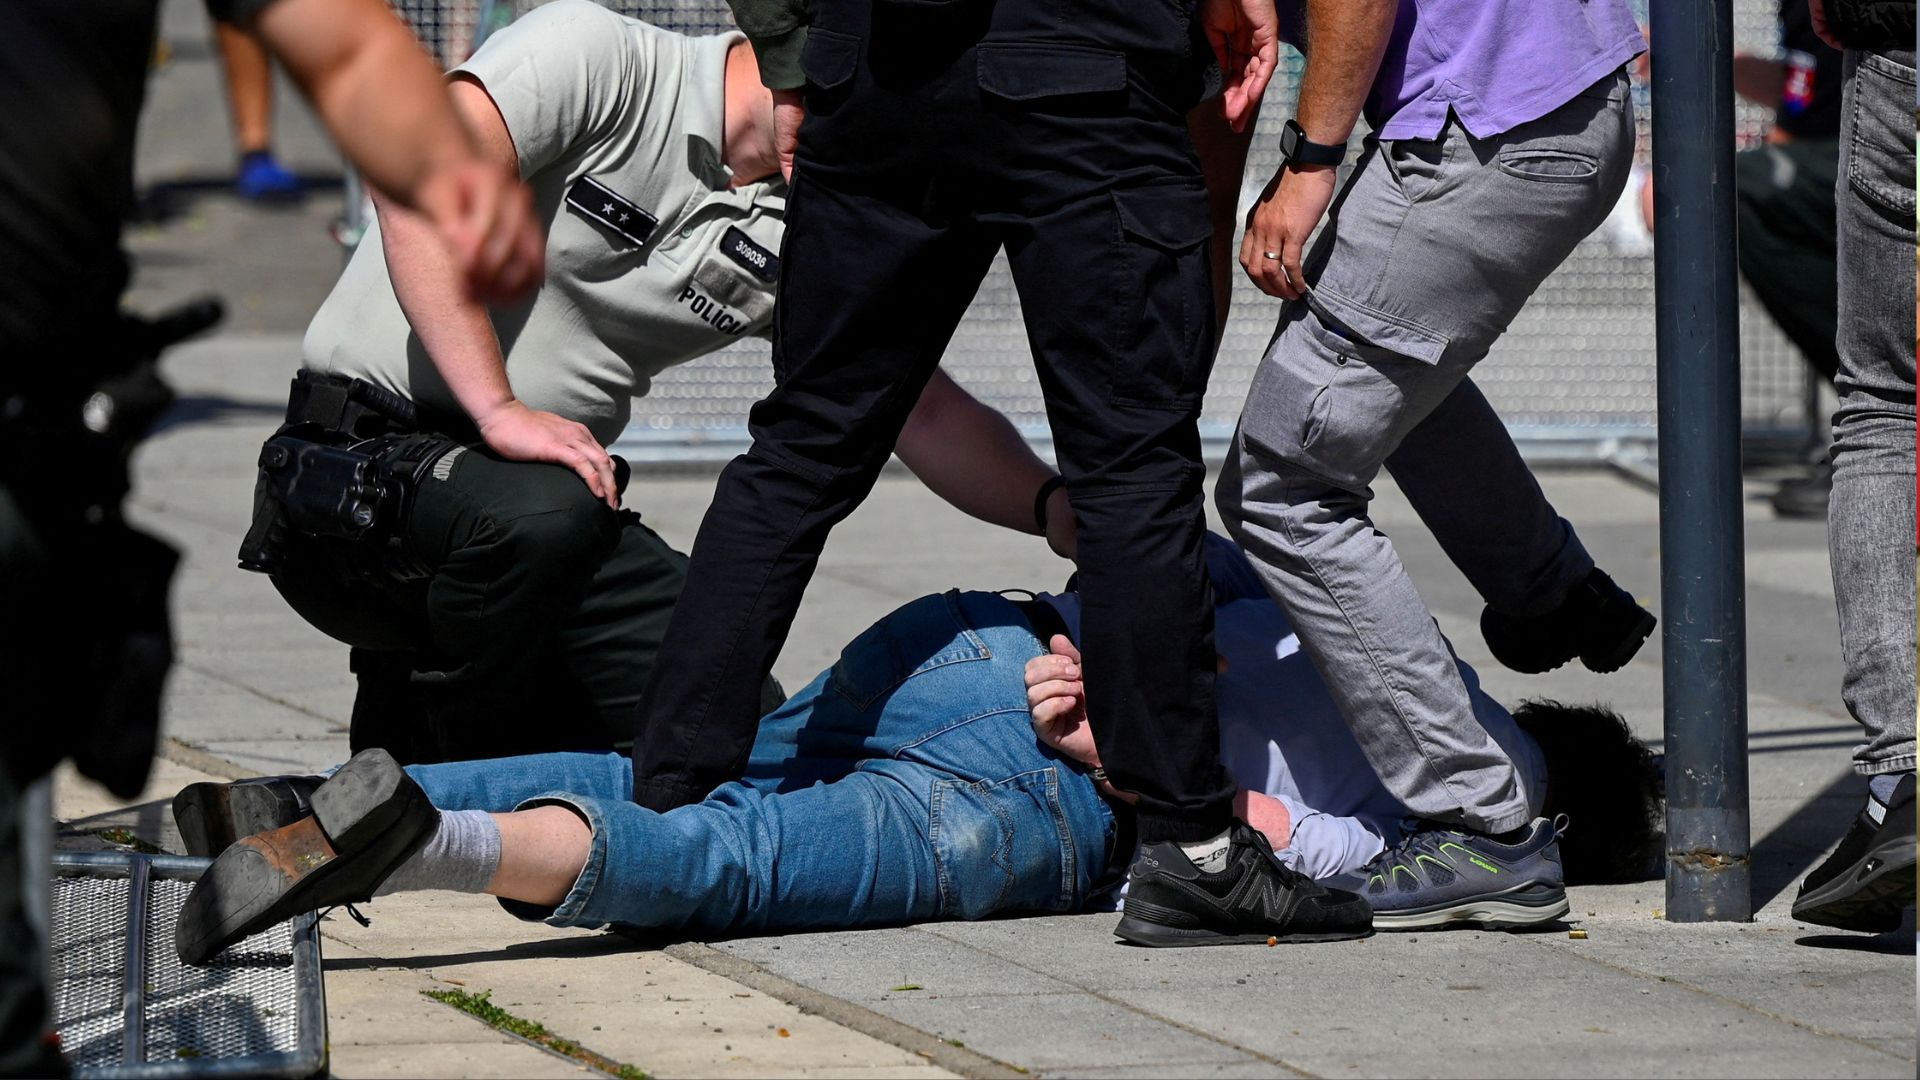 The suspect is detained after the shooting. /Radovan Stoklasa/Reuters